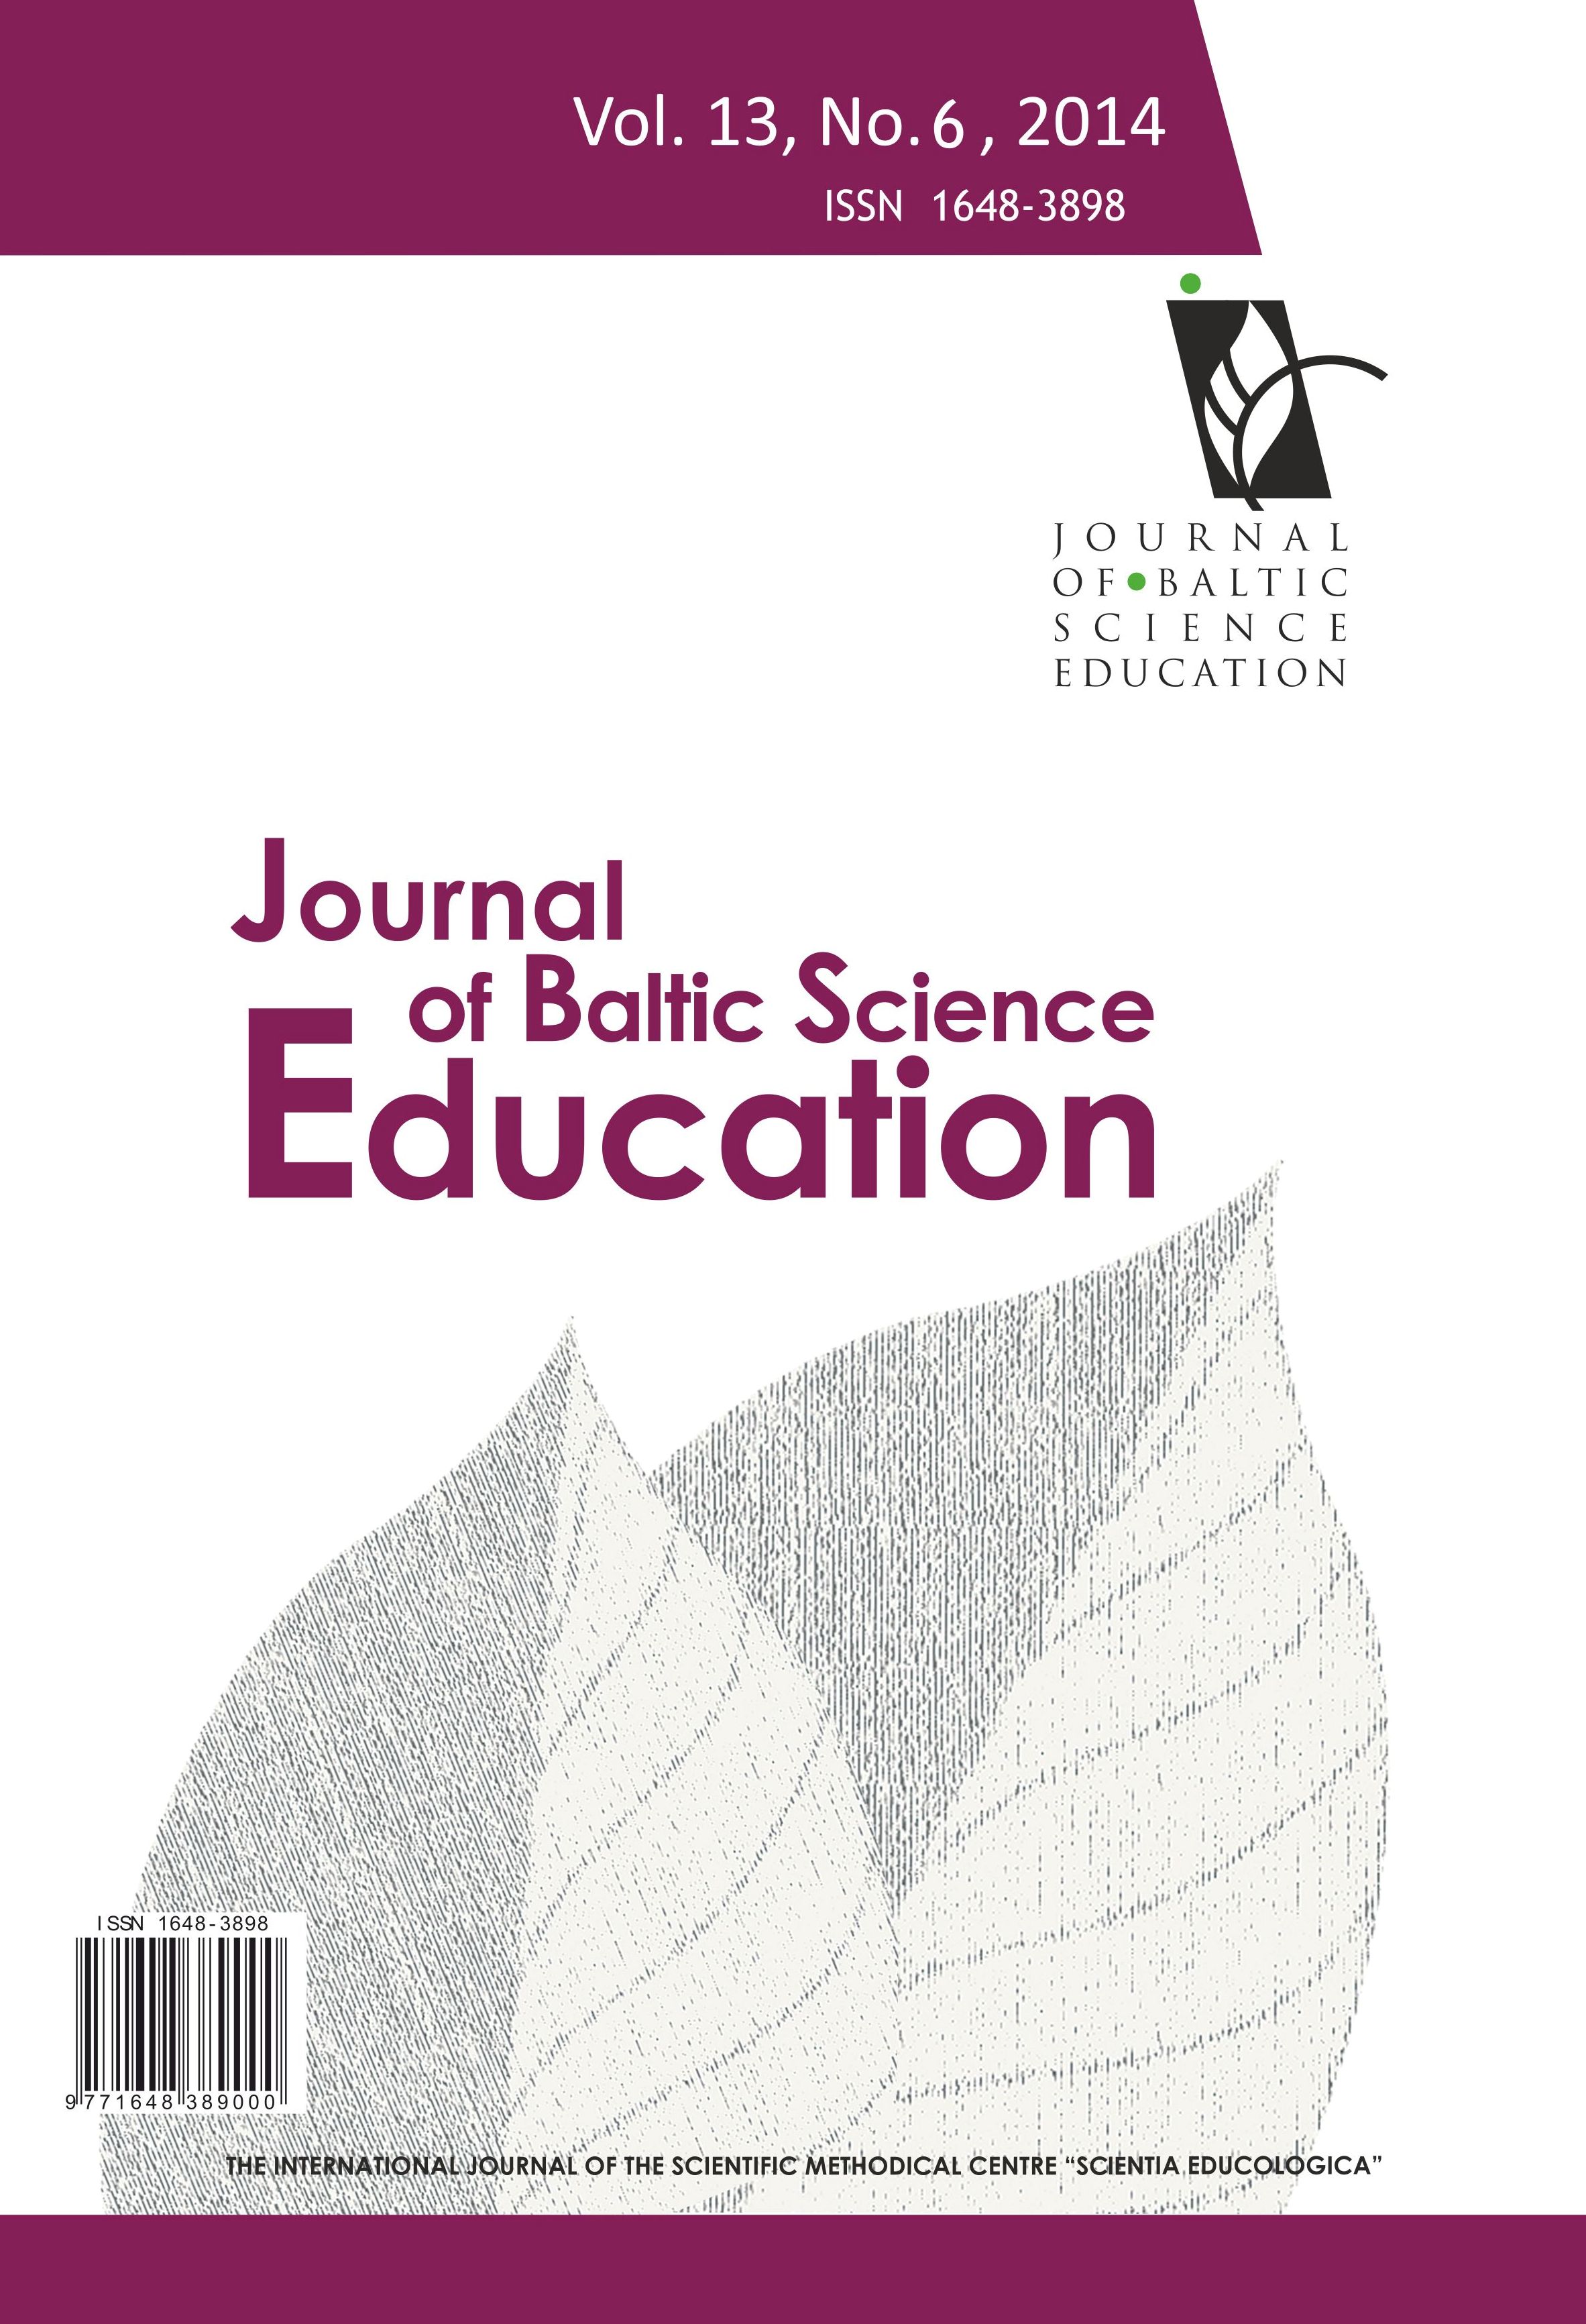 THE EFFECT OF MICROTEACHING ON THE TEACHING SKILLS OF PRE-SERVICE SCIENCE TEACHERS